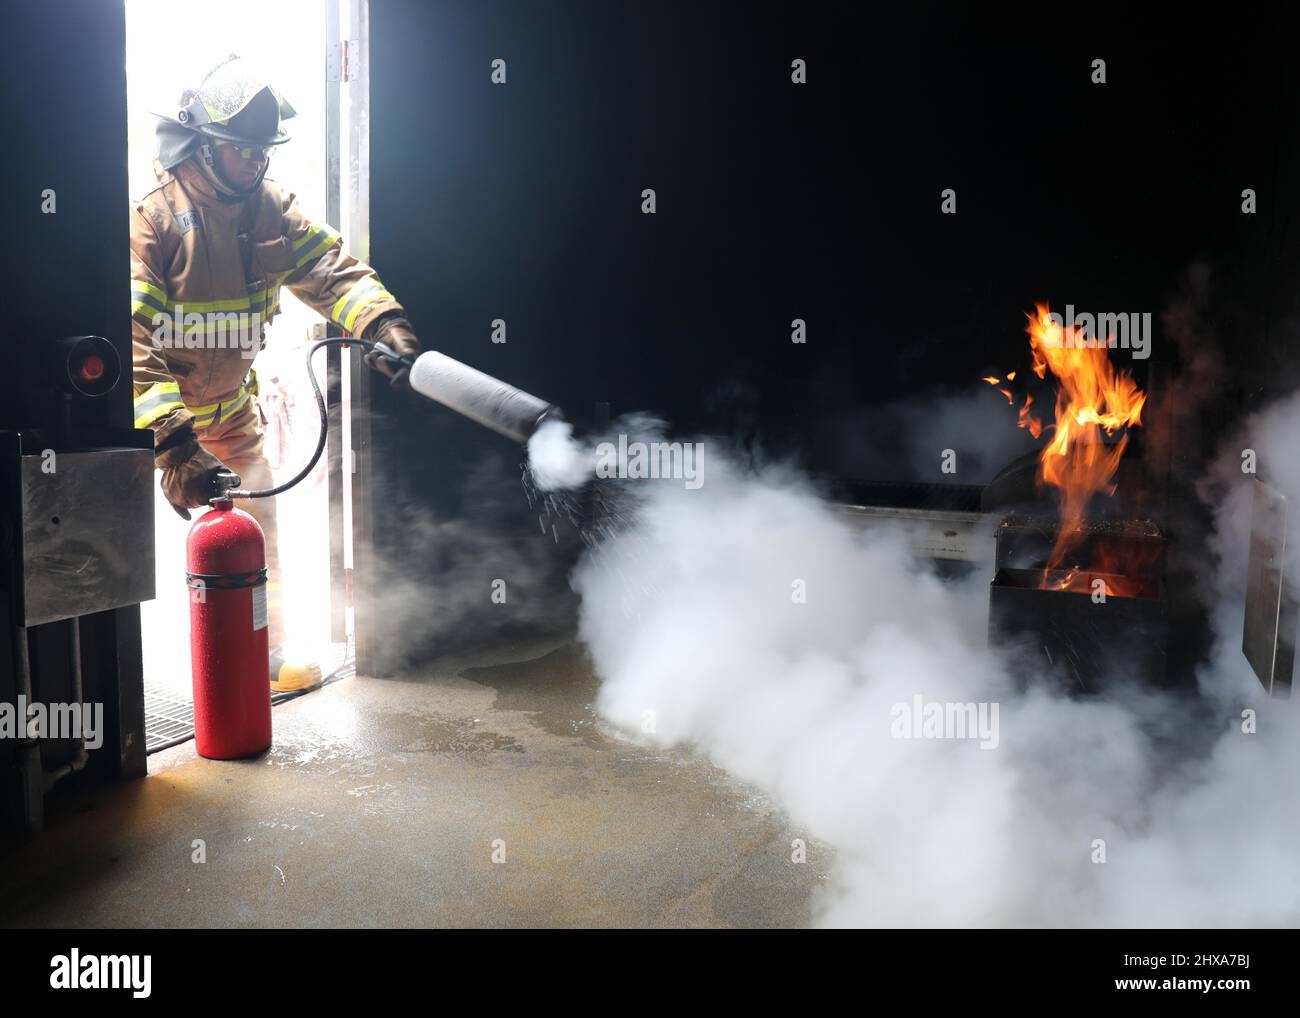 220223-N-OH262-0017--FORT EUSTIS, Va. (February 23, 2022)--A newly hired Civil Service Mariner (CIVMAR) uses a CO2 fire extinguisher to put out a simulated trashcan fire at the Military Sealift Command Training Center East on Joint Base Langley-Fort Eustis, Virginia, Feb. 23. The training was part of the MSC Basic Training Damage Control curriculum, which must be successfully completed prior to sailing in MSC's fleet of ships. (U.S. Navy photo by Bill Mesta/released) Stock Photo